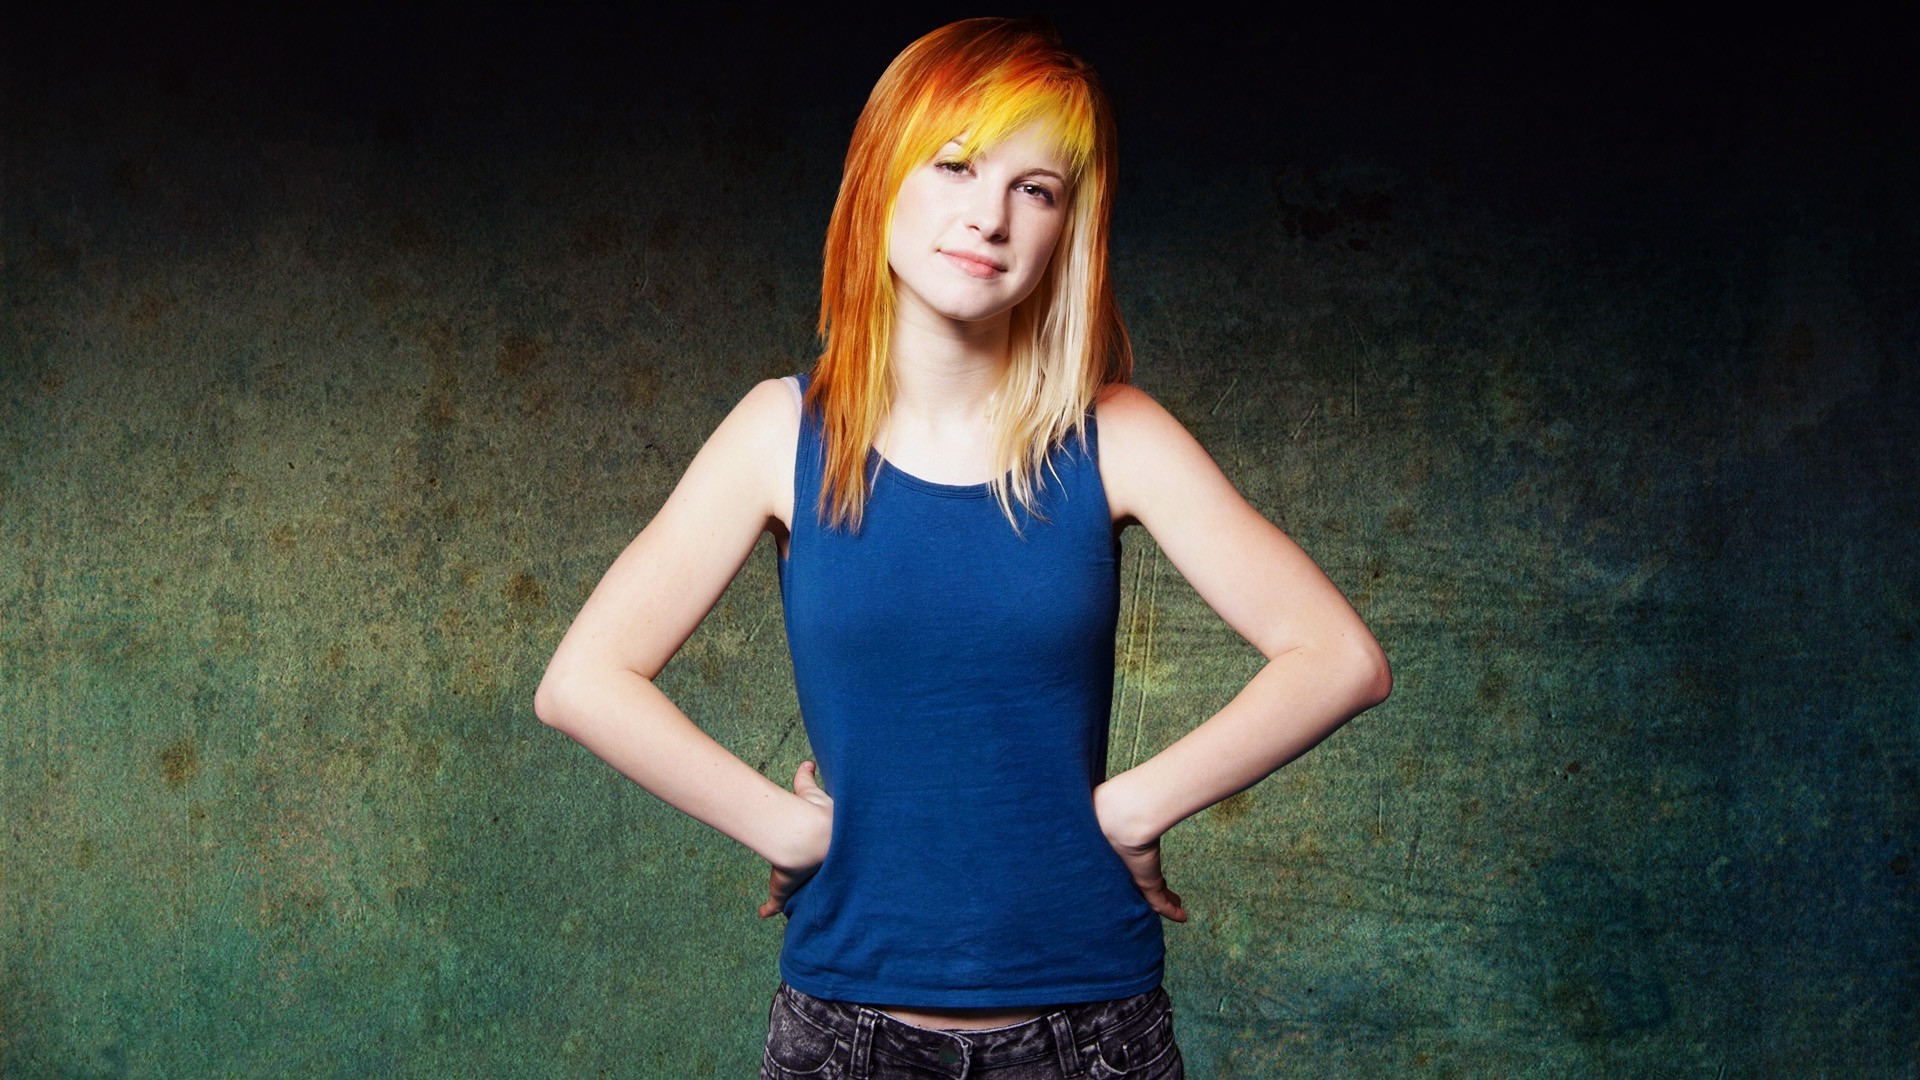 Hayley Williams Singer Celebrity Redhead Women Band Paramore 1920x1080